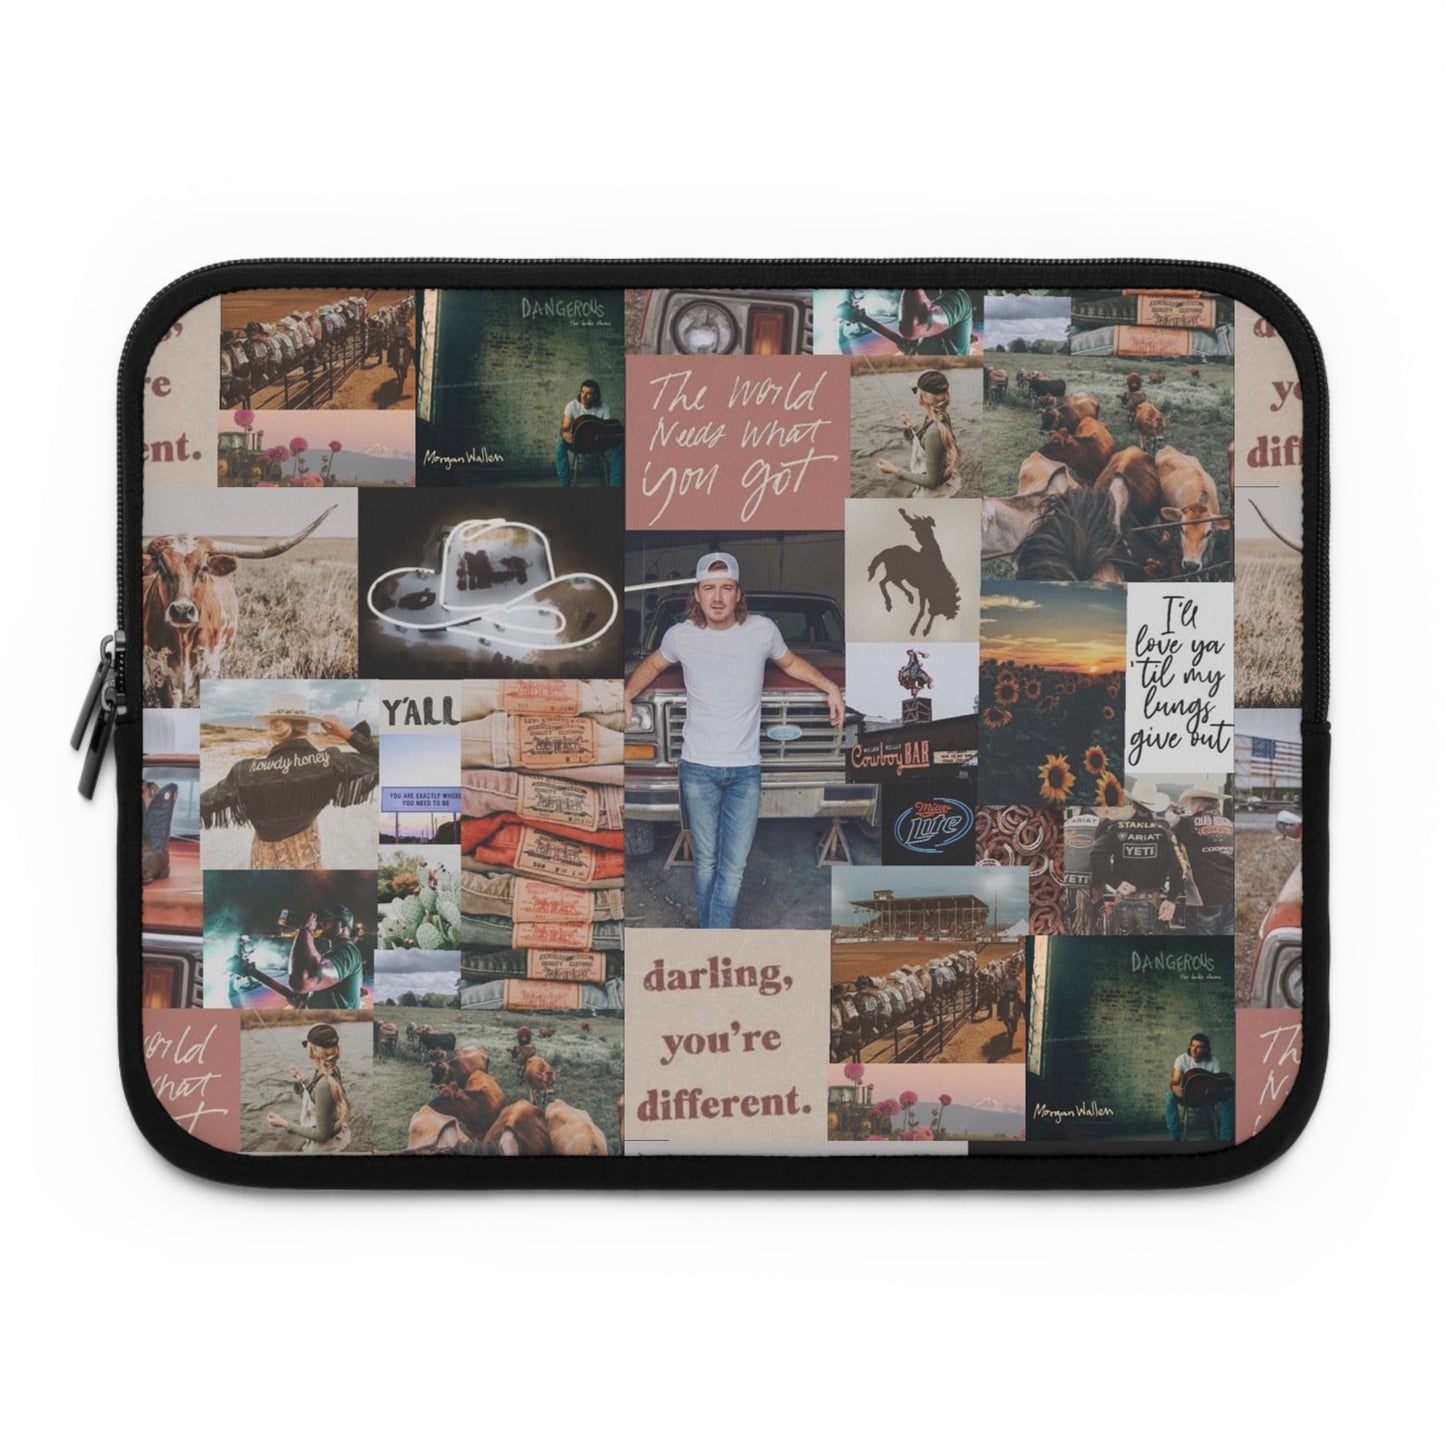 Morgan Wallen Darling You're Different Collage Laptop Sleeve